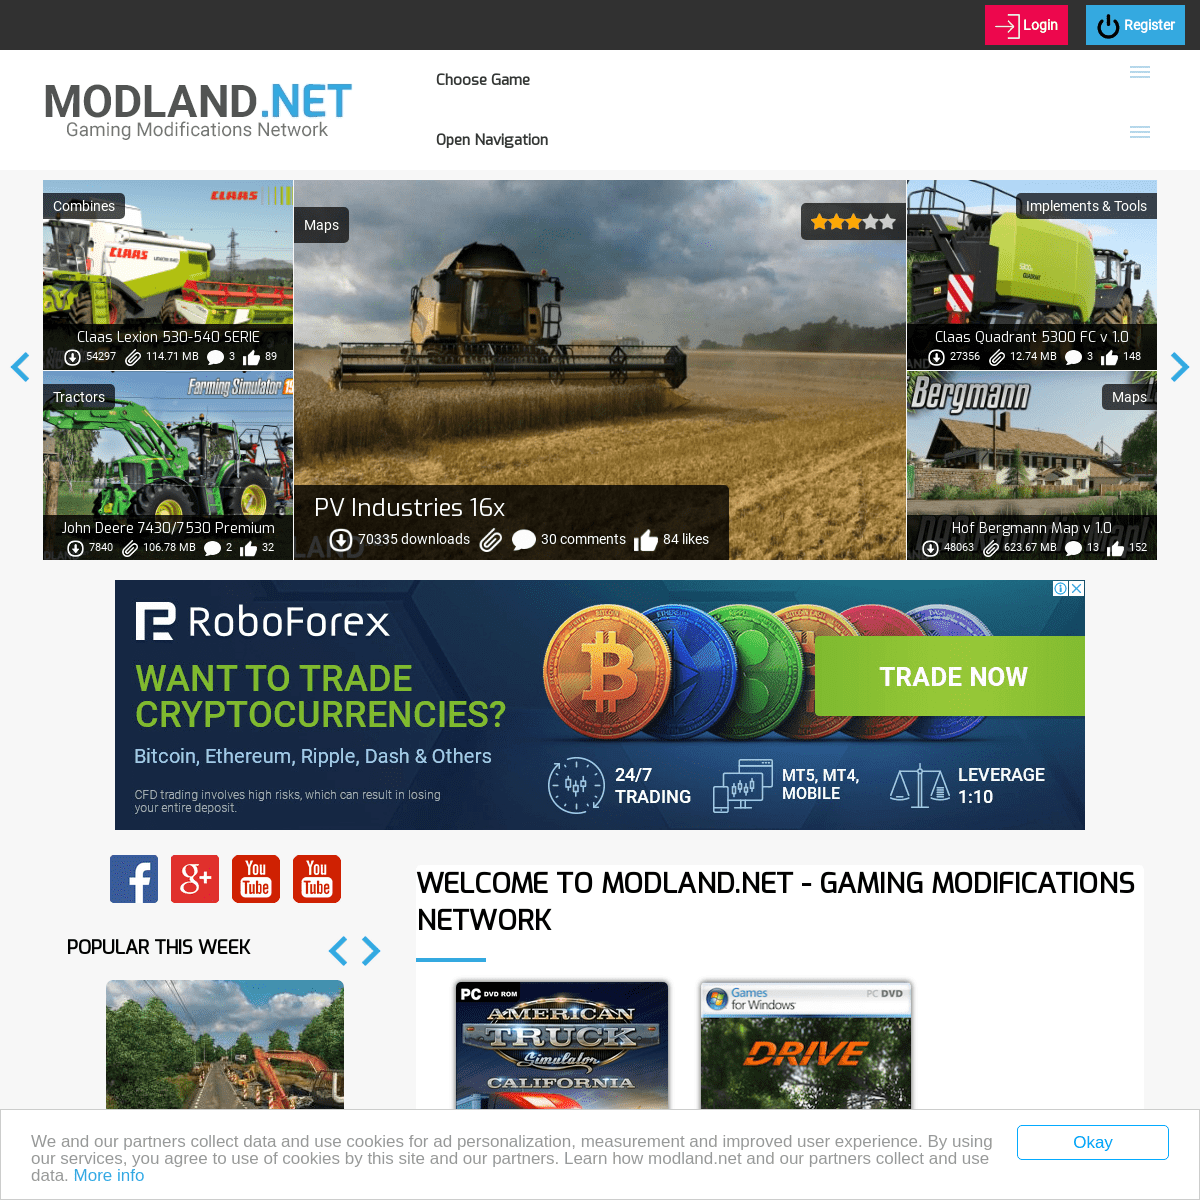 Gaming Mods Community - Download the Latest Mods - ModLand.net